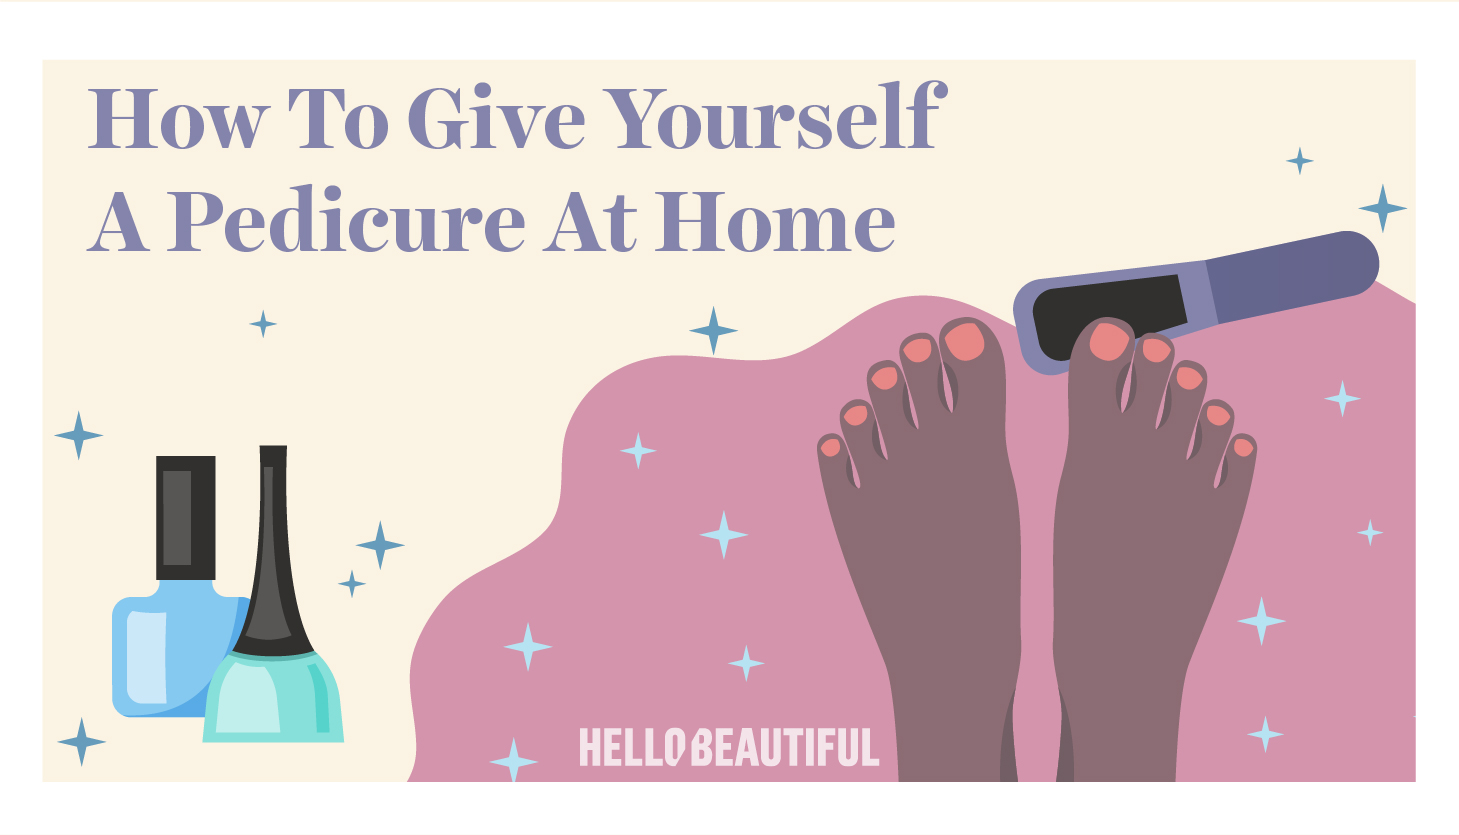 How To Give Yourself A Pedicure At Home